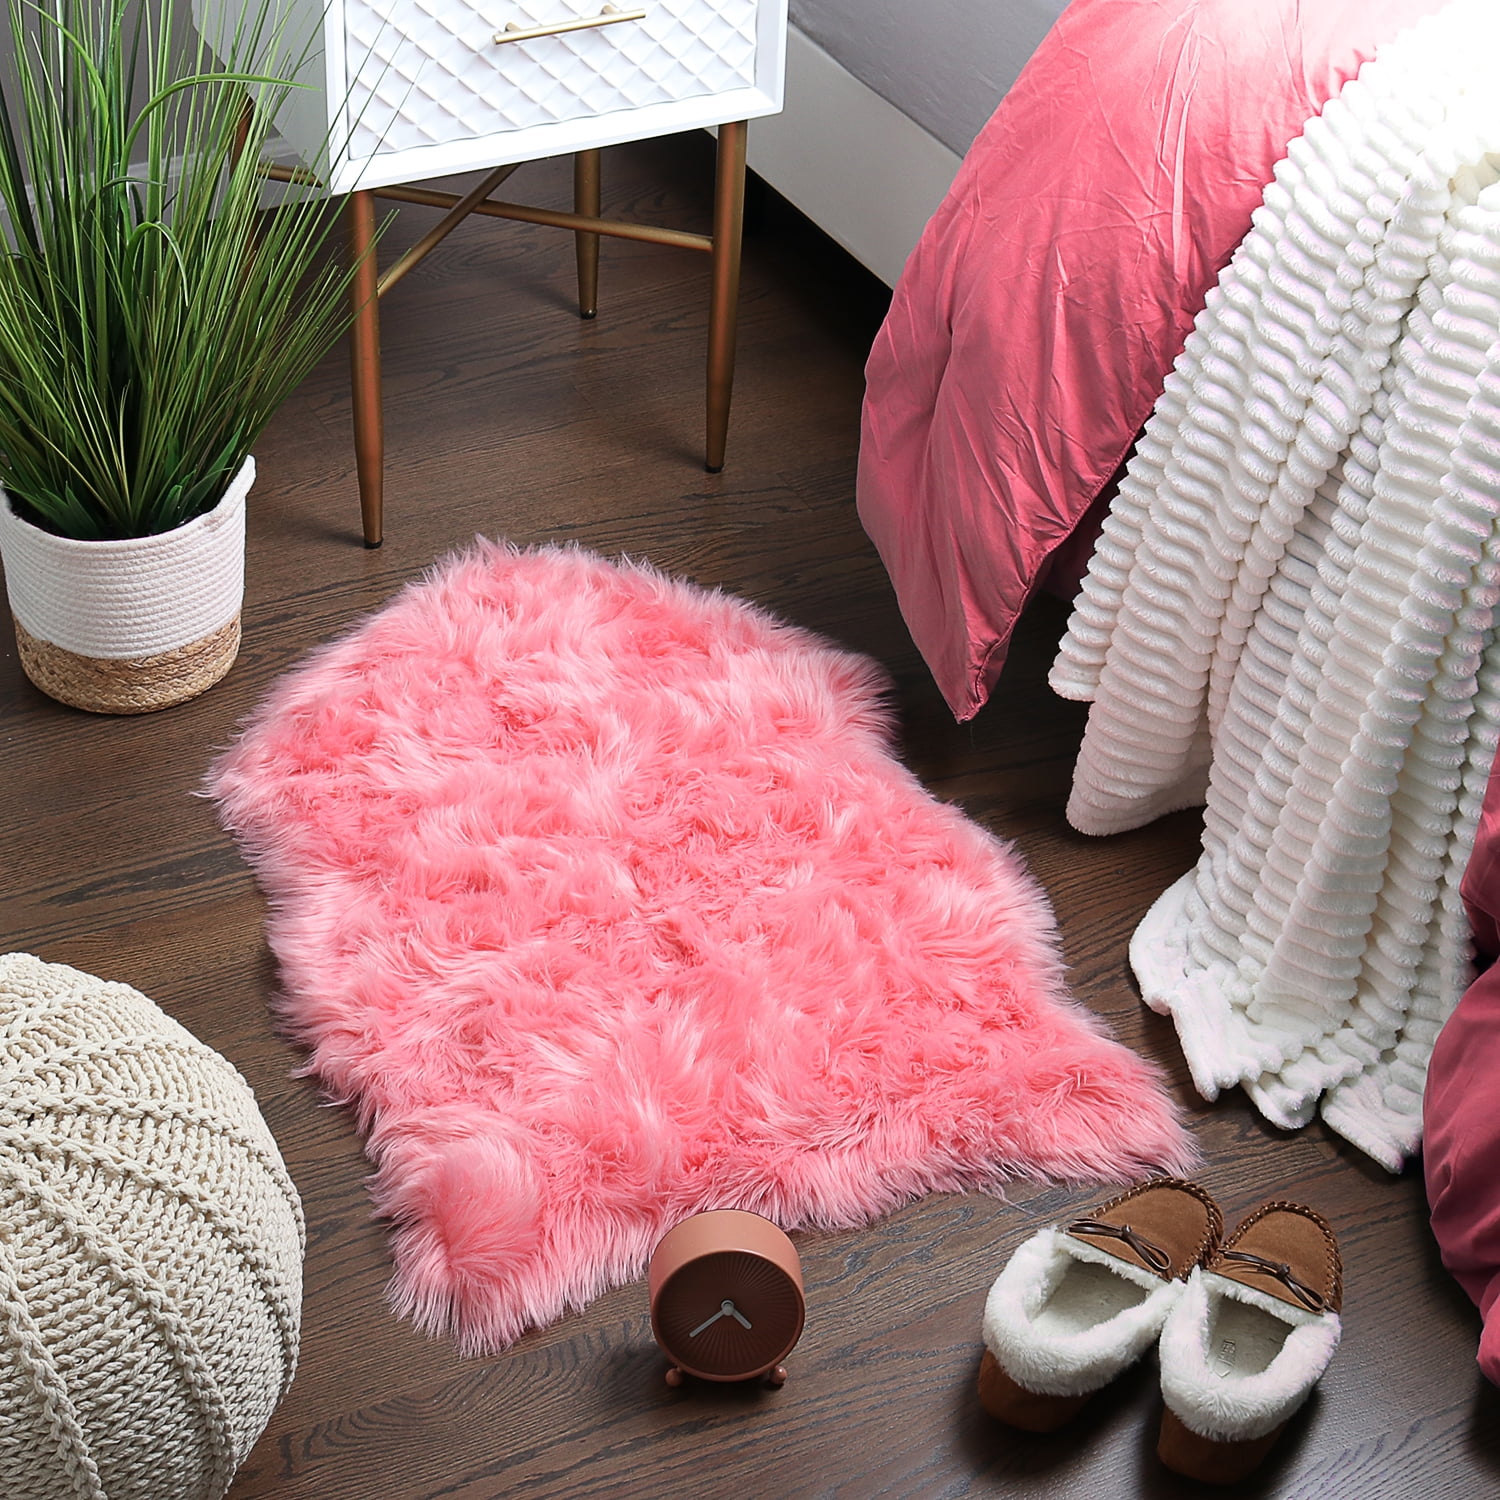 Faux Sheepskin Chair Seat Pad Shaggy Area Rugs For Bedroom Floor Light Pink 